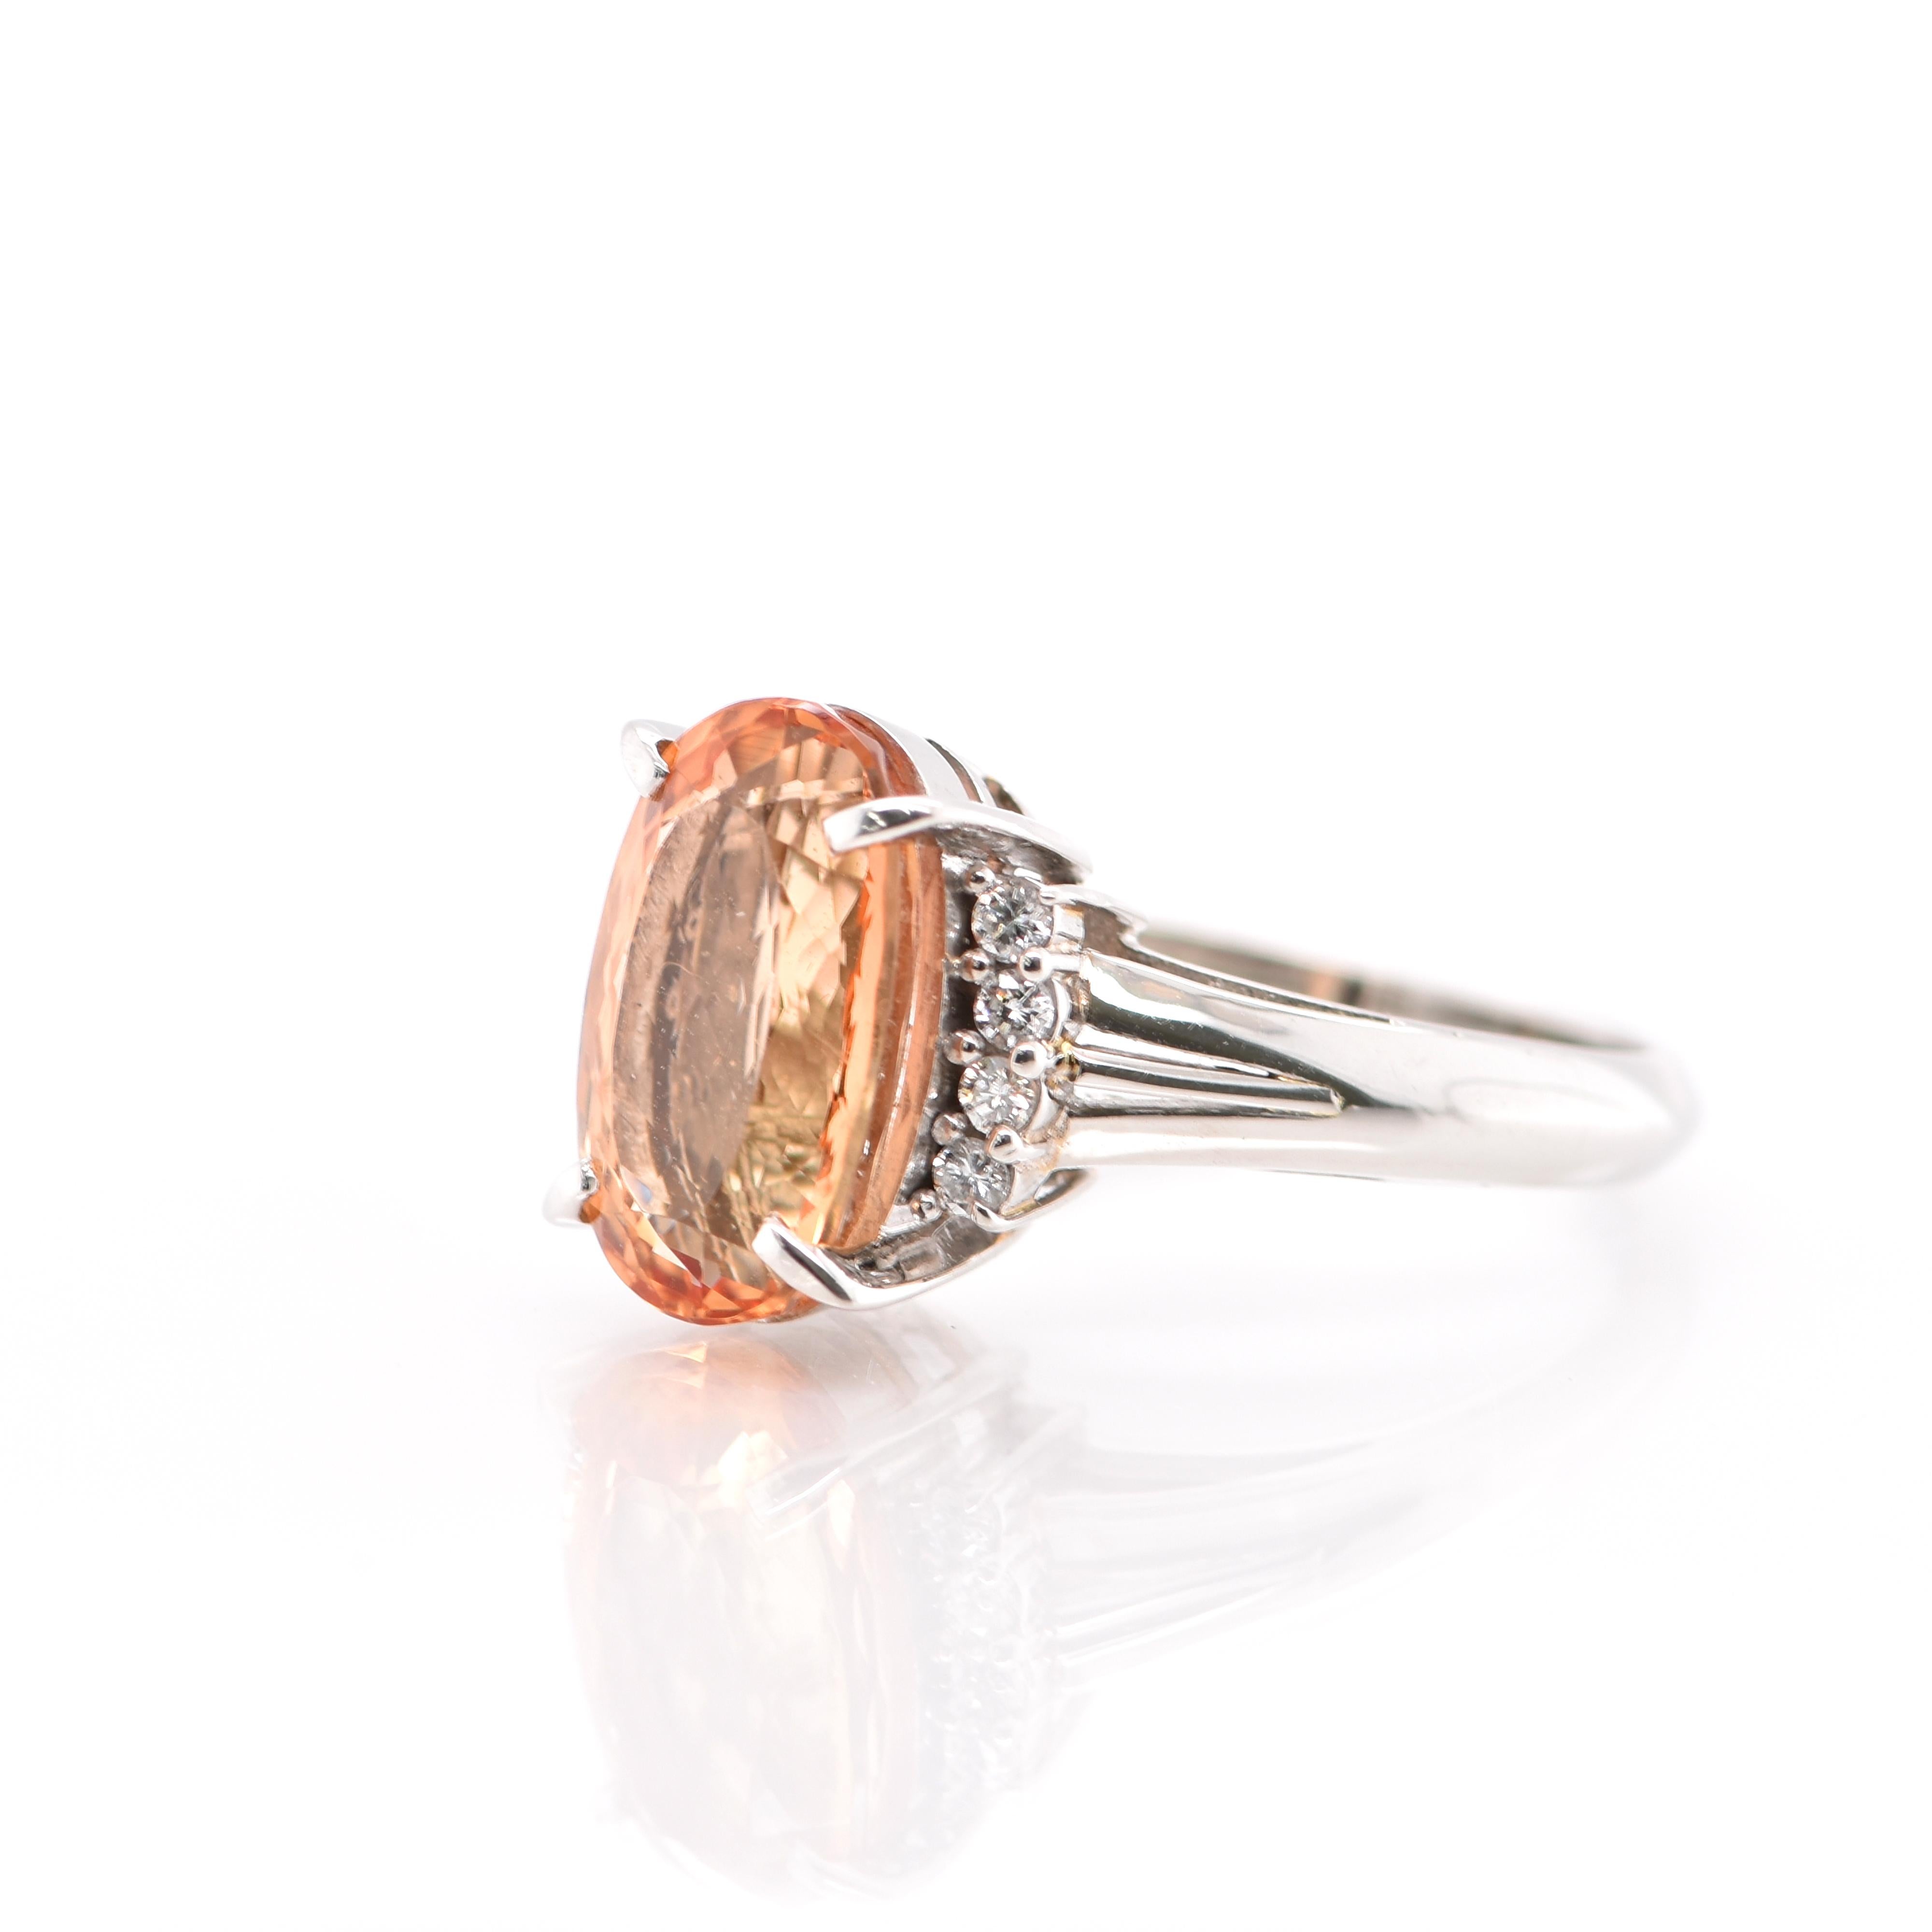 Modern 4.05 Carat Imperial Topaz and Diamond Cocktail Ring Set in Platinum